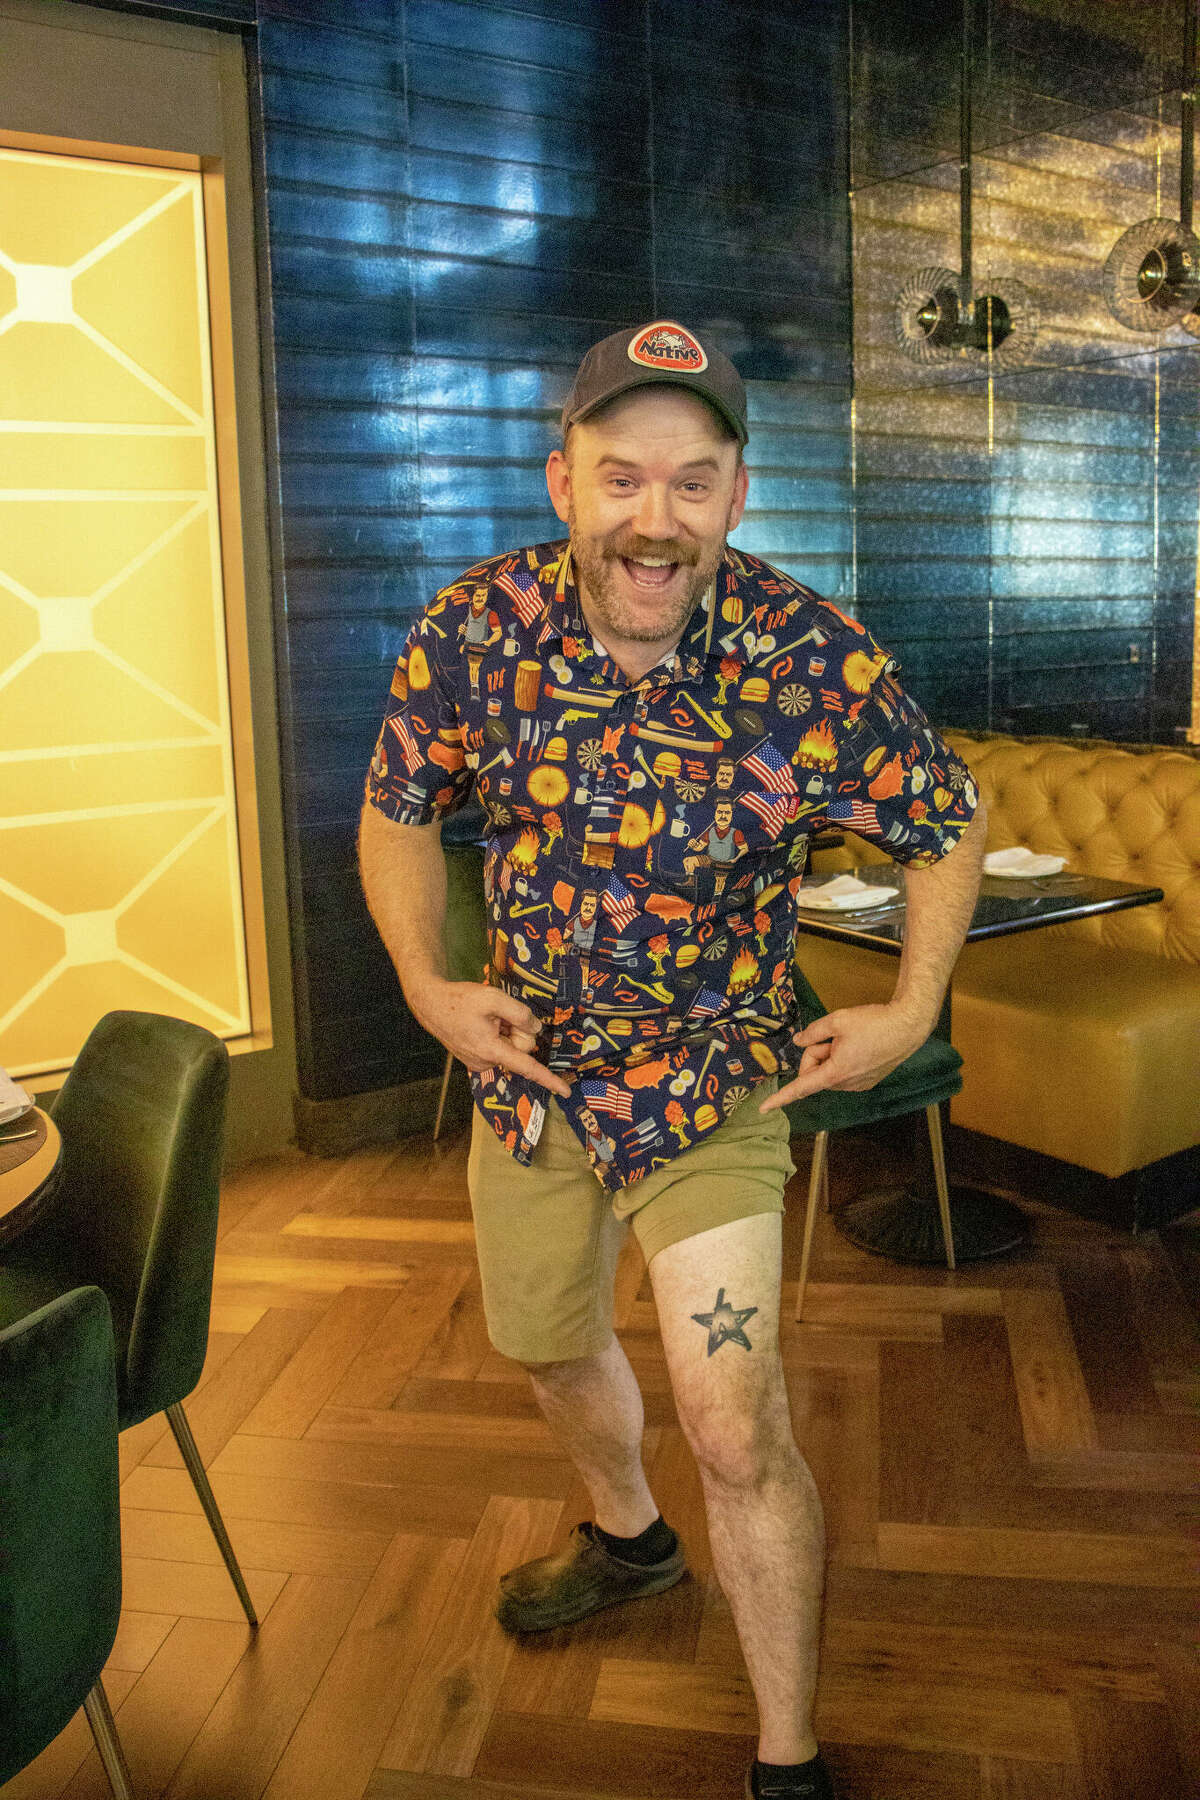 Many former Underbelly workers have an Underbelly star tattoo, including Nick Fine who is still at the umbrella company.